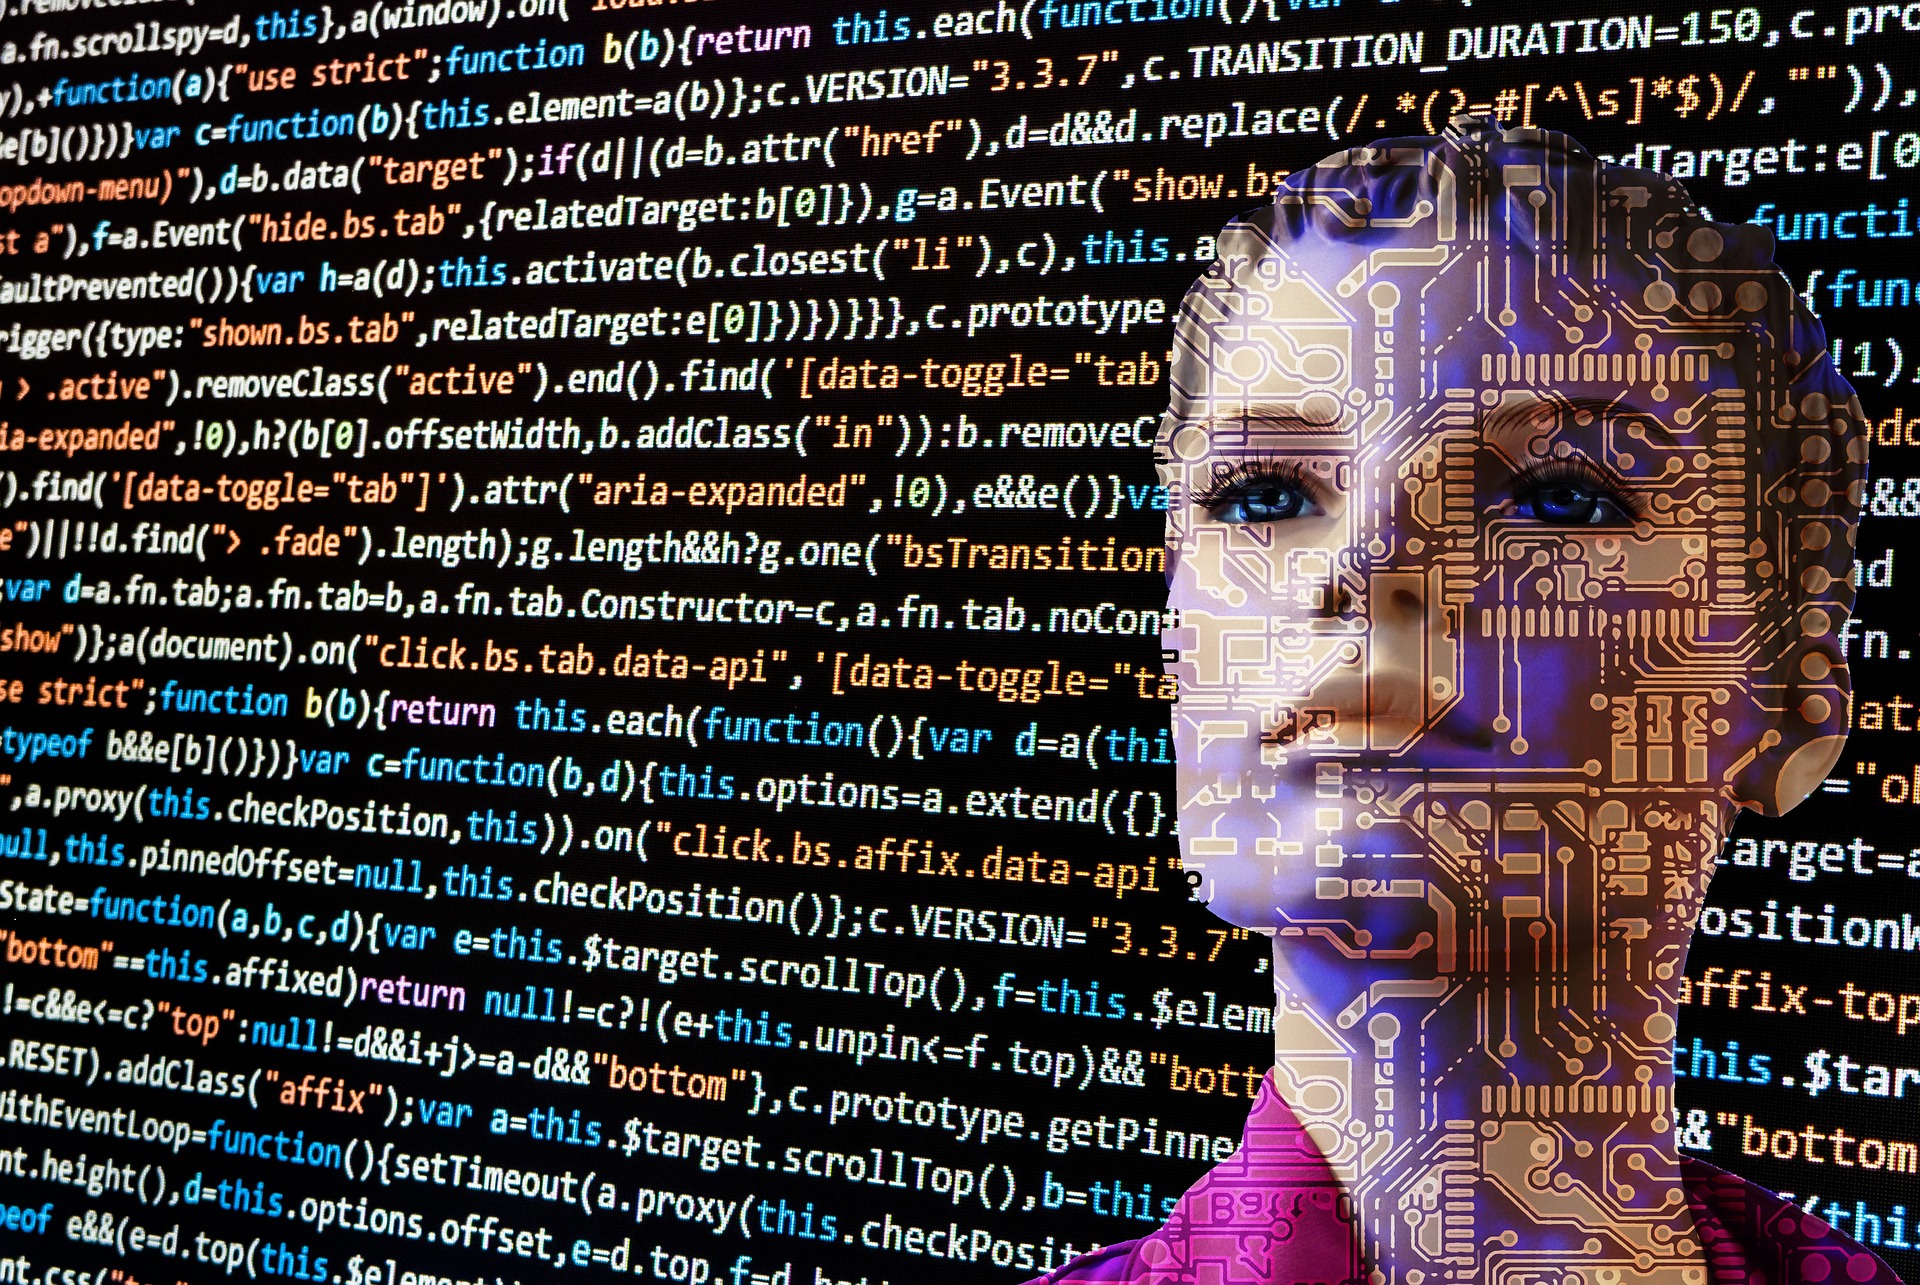 robotic looking women's face with data background